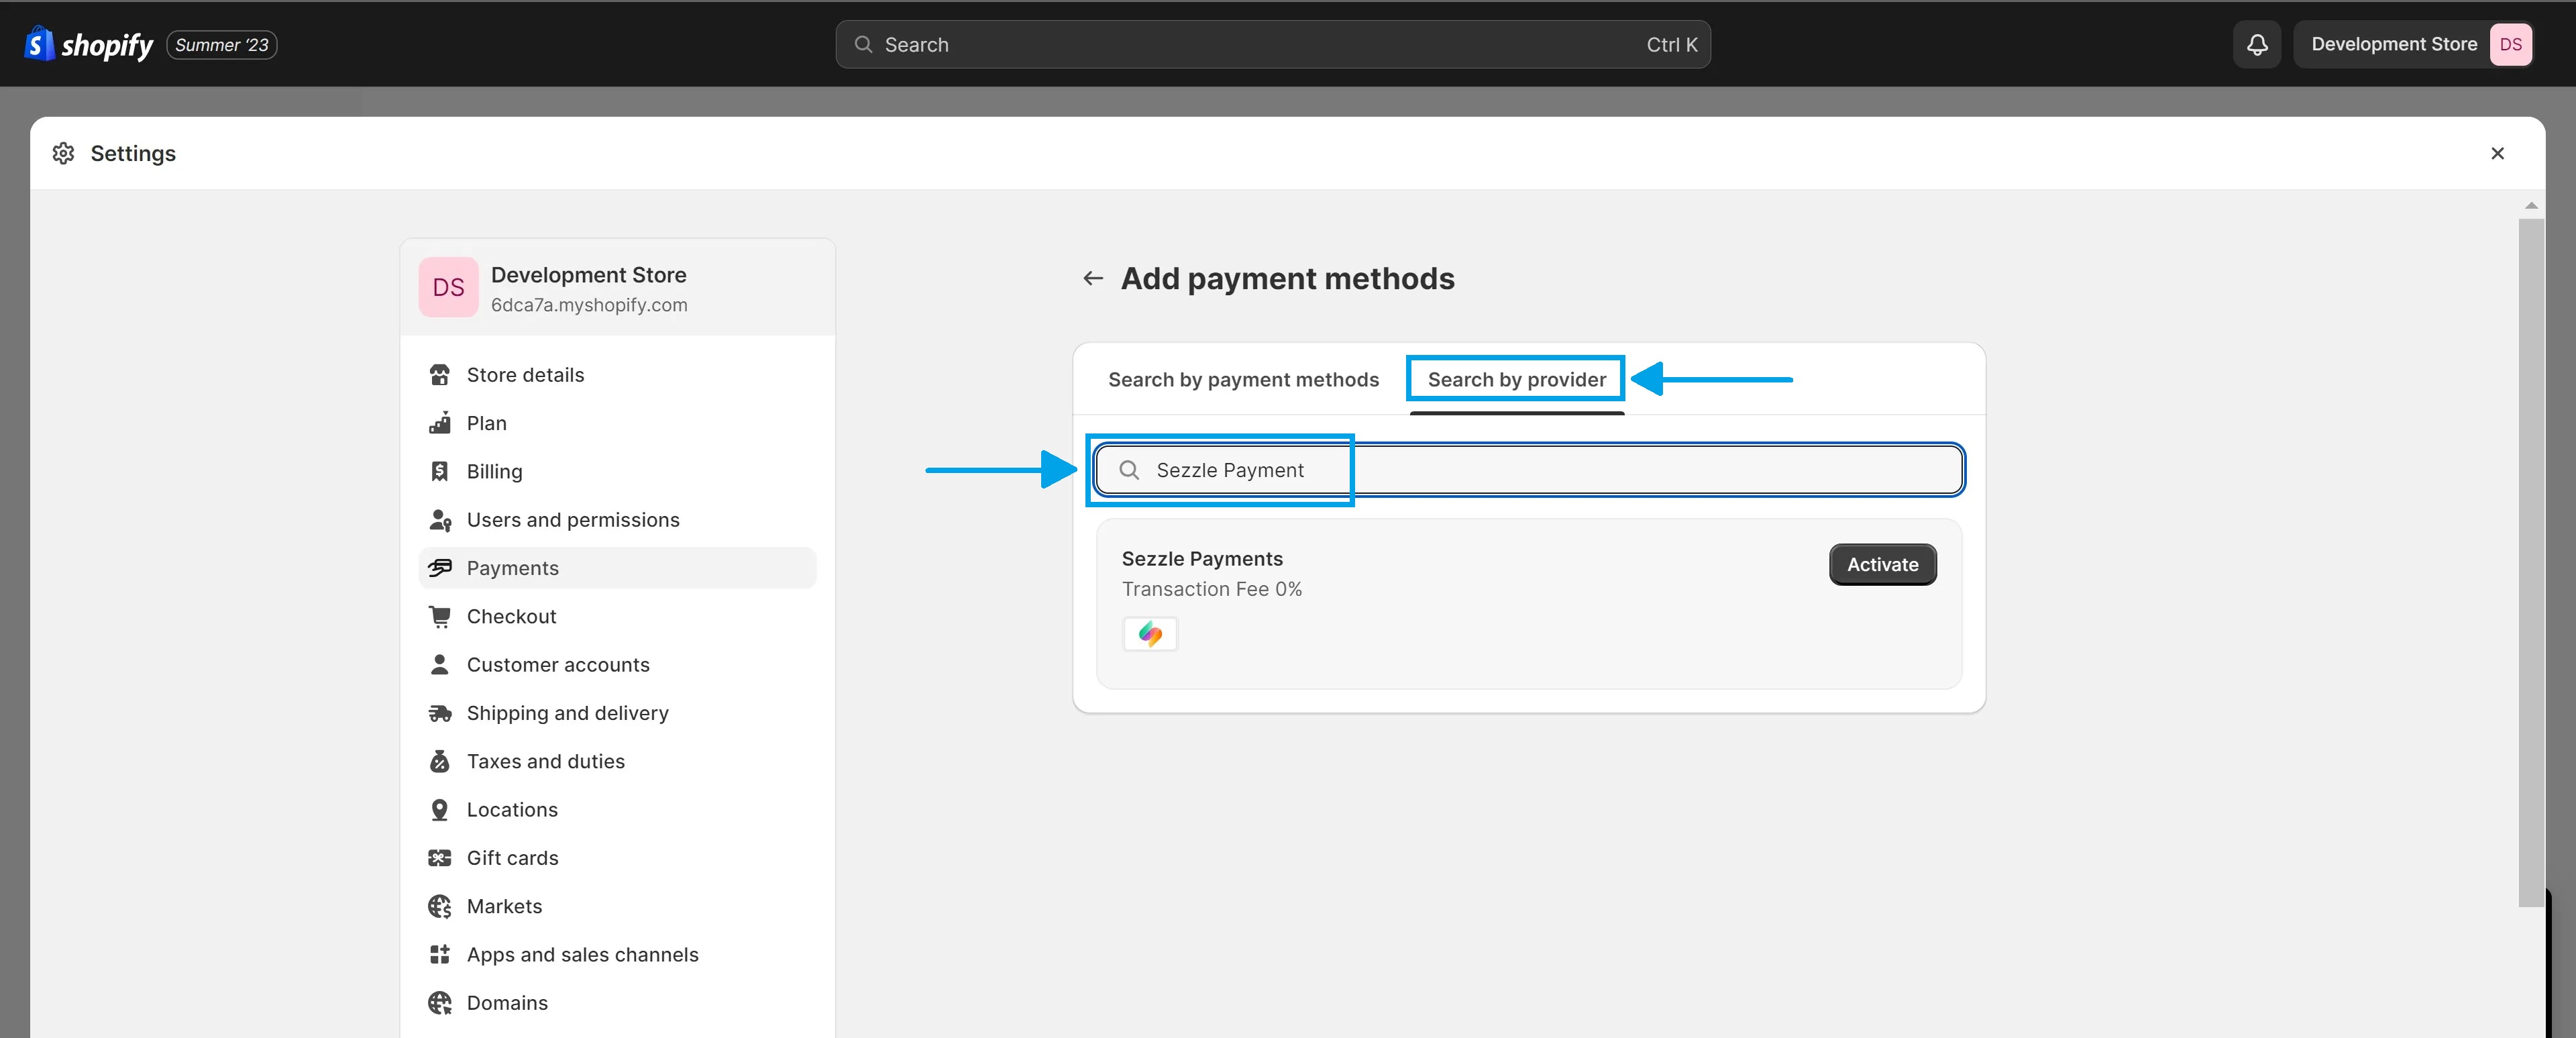 KeepShoppers screenshot: Adding Sezzle as a payment provider to your Shopify store